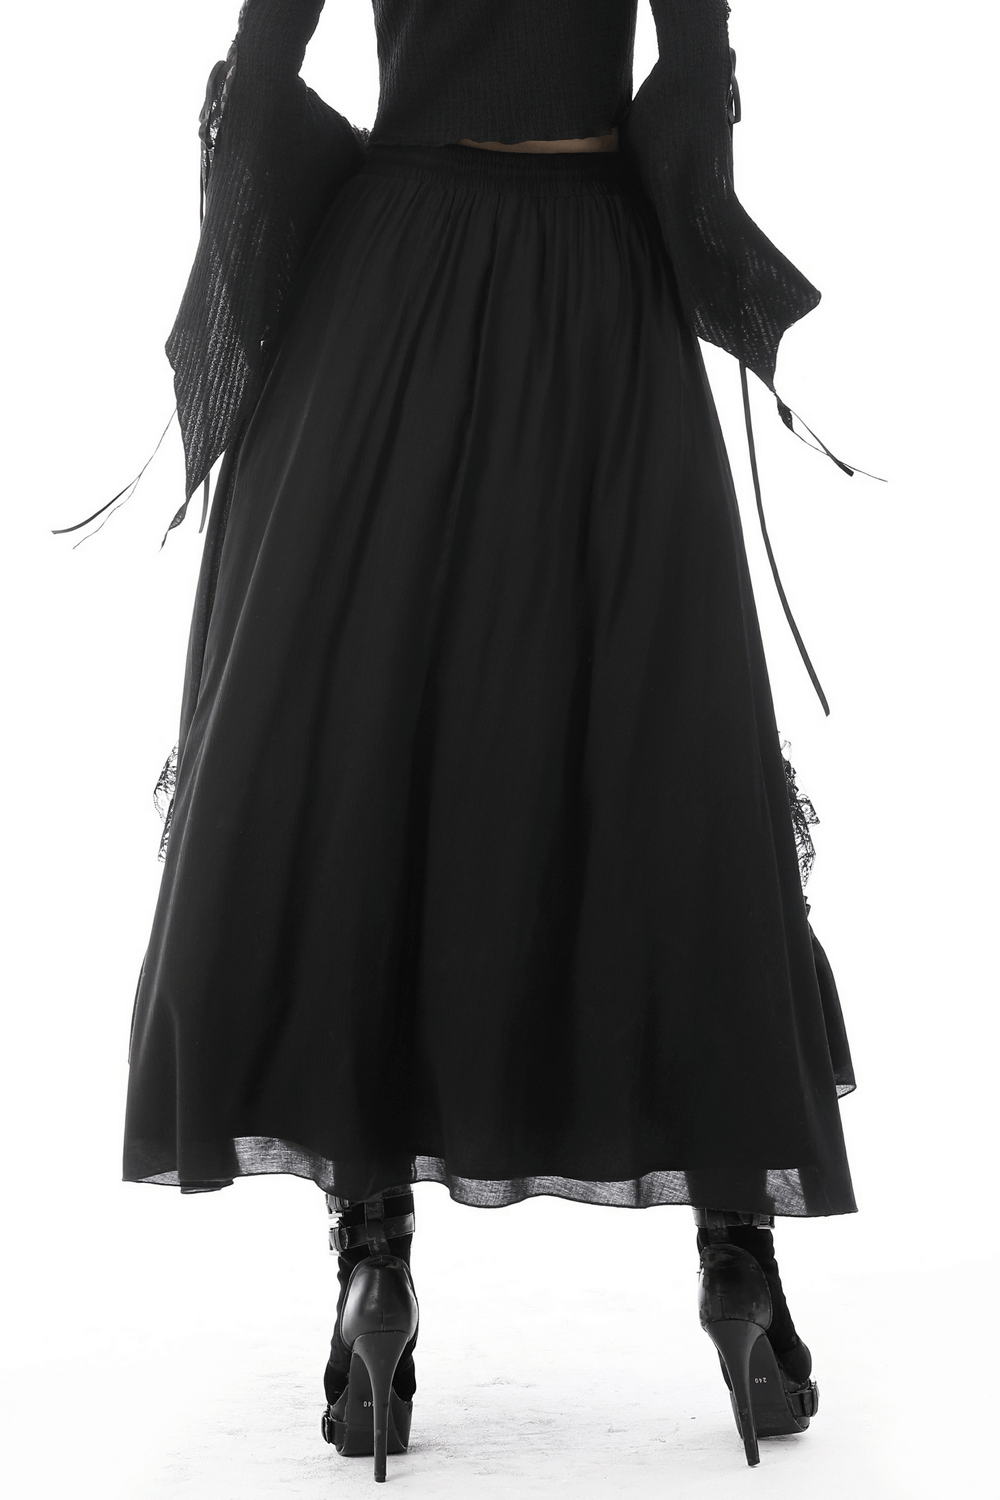 Elegant Women's Tiered Maxi Skirt with Lace Detail